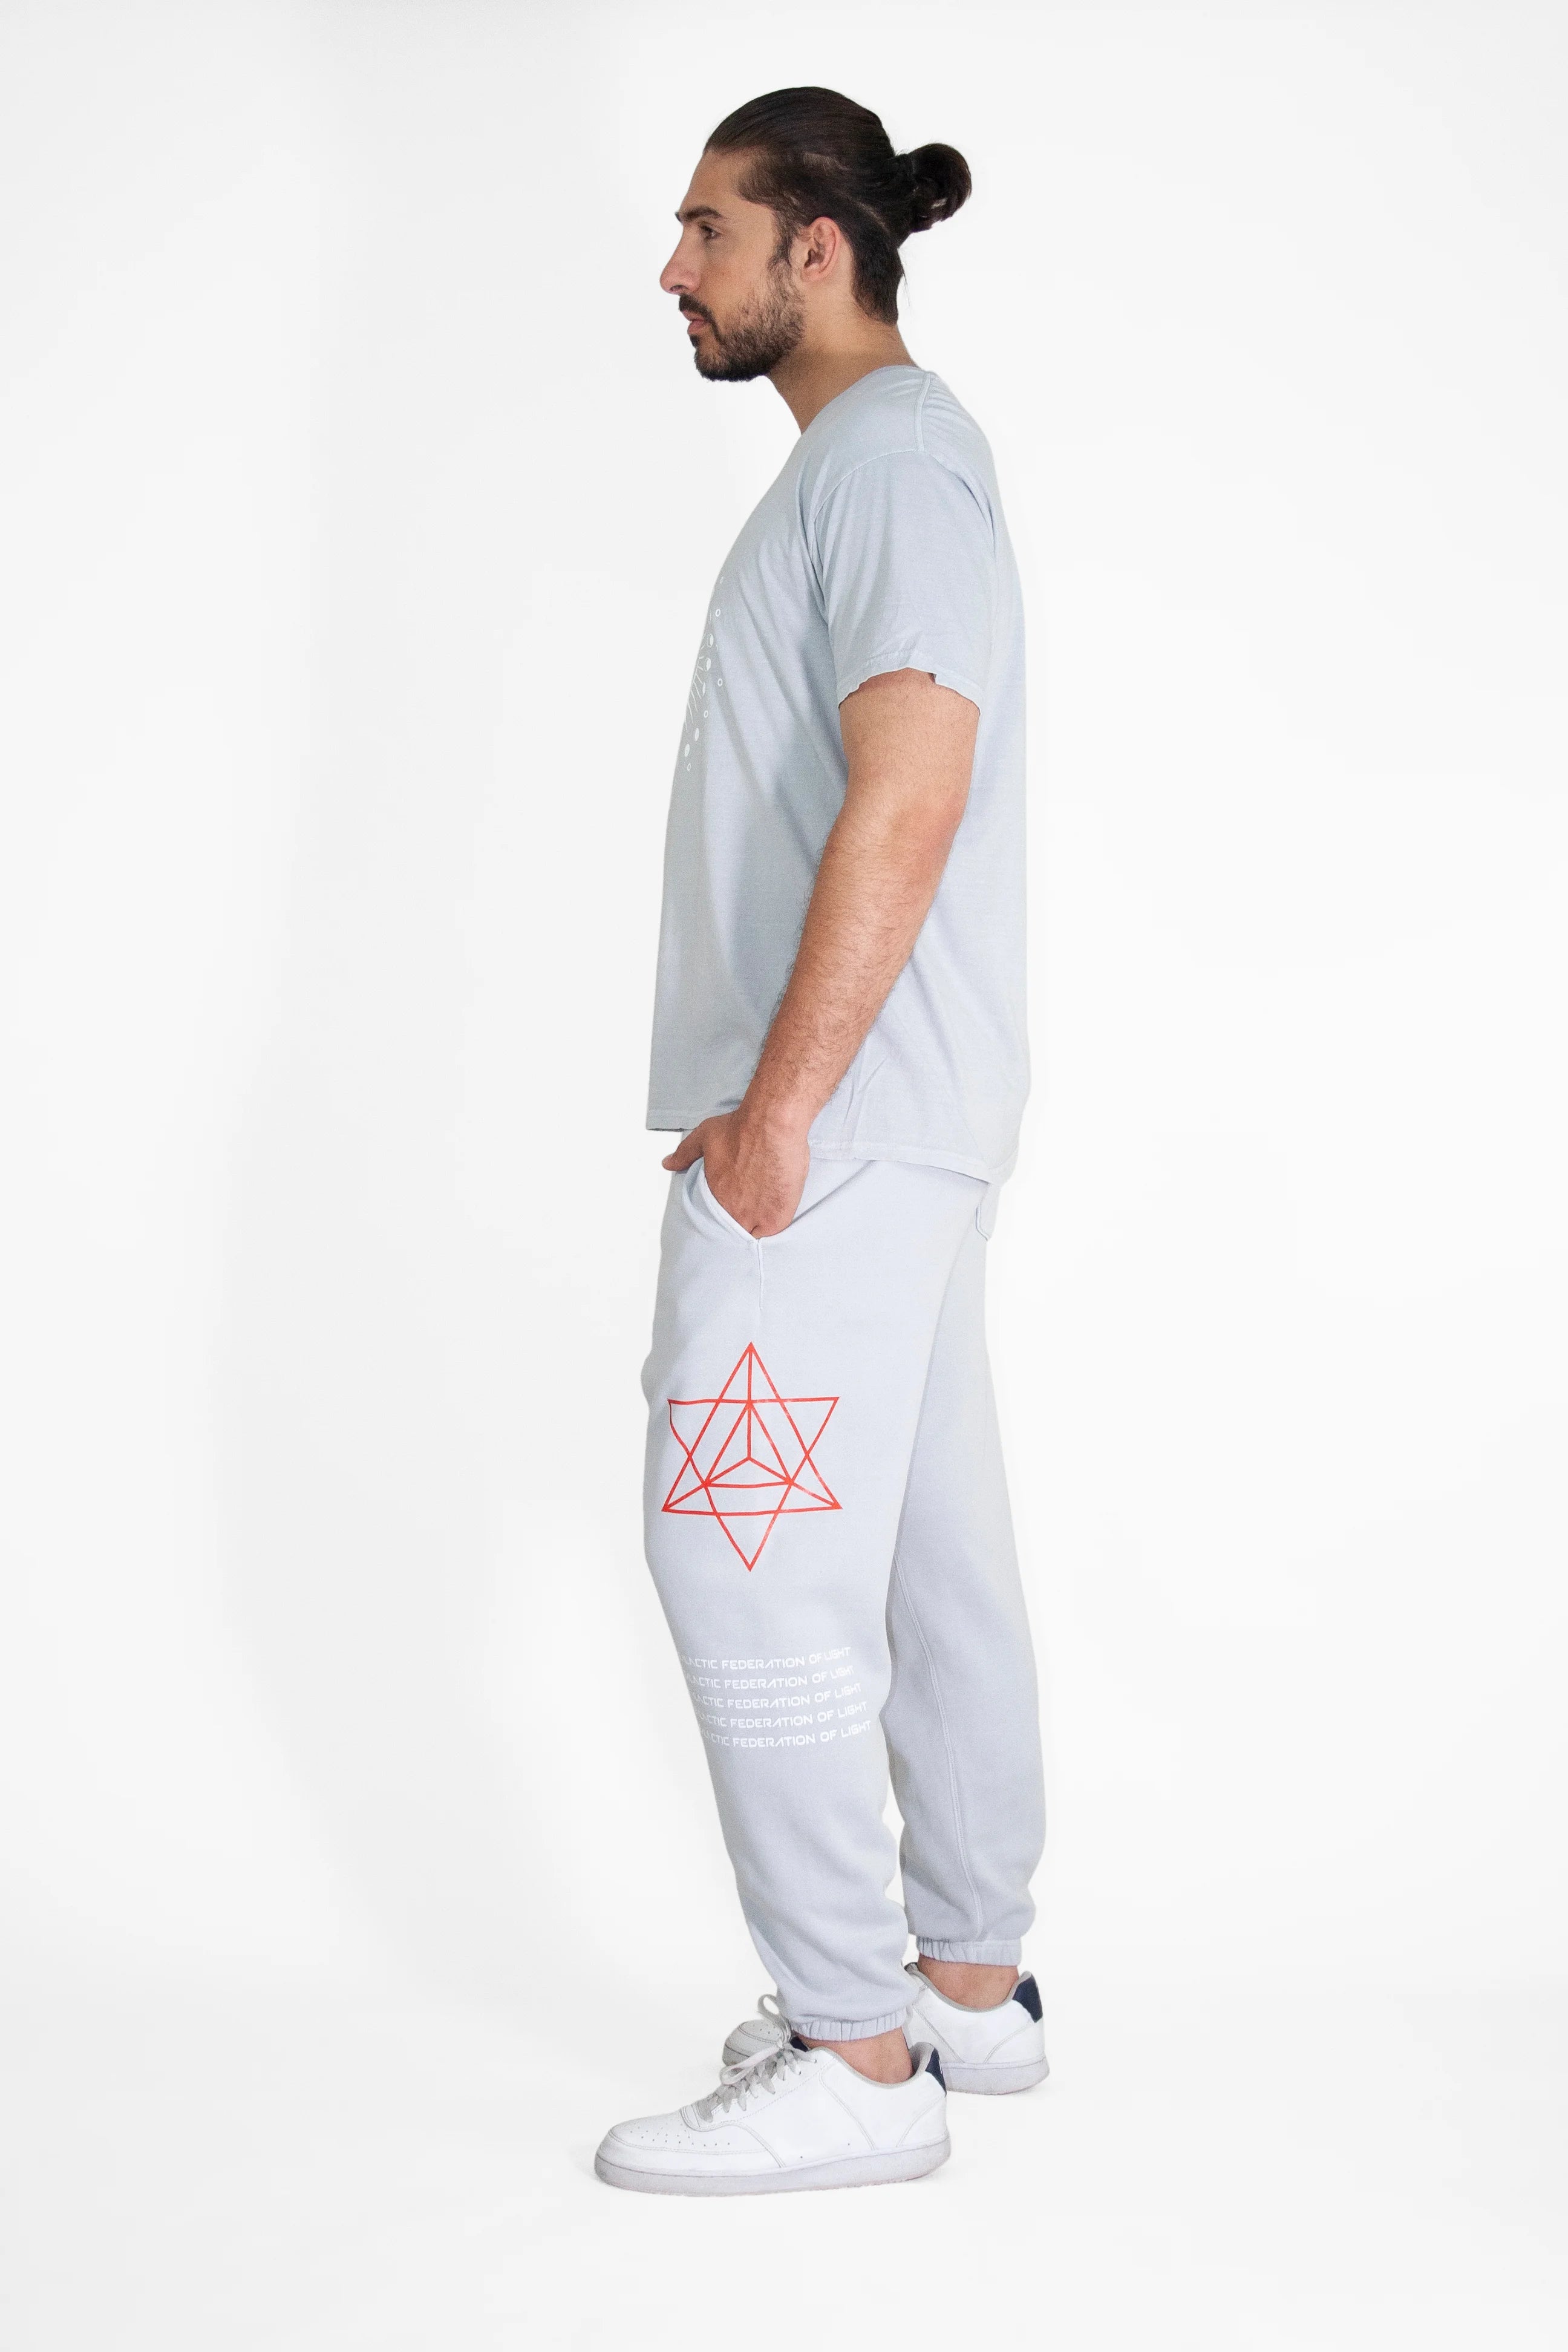 A man wearing HYPERGALACTIC PANTS IN GALACTIC GRAY from GFLApparel and a red t-shirt.